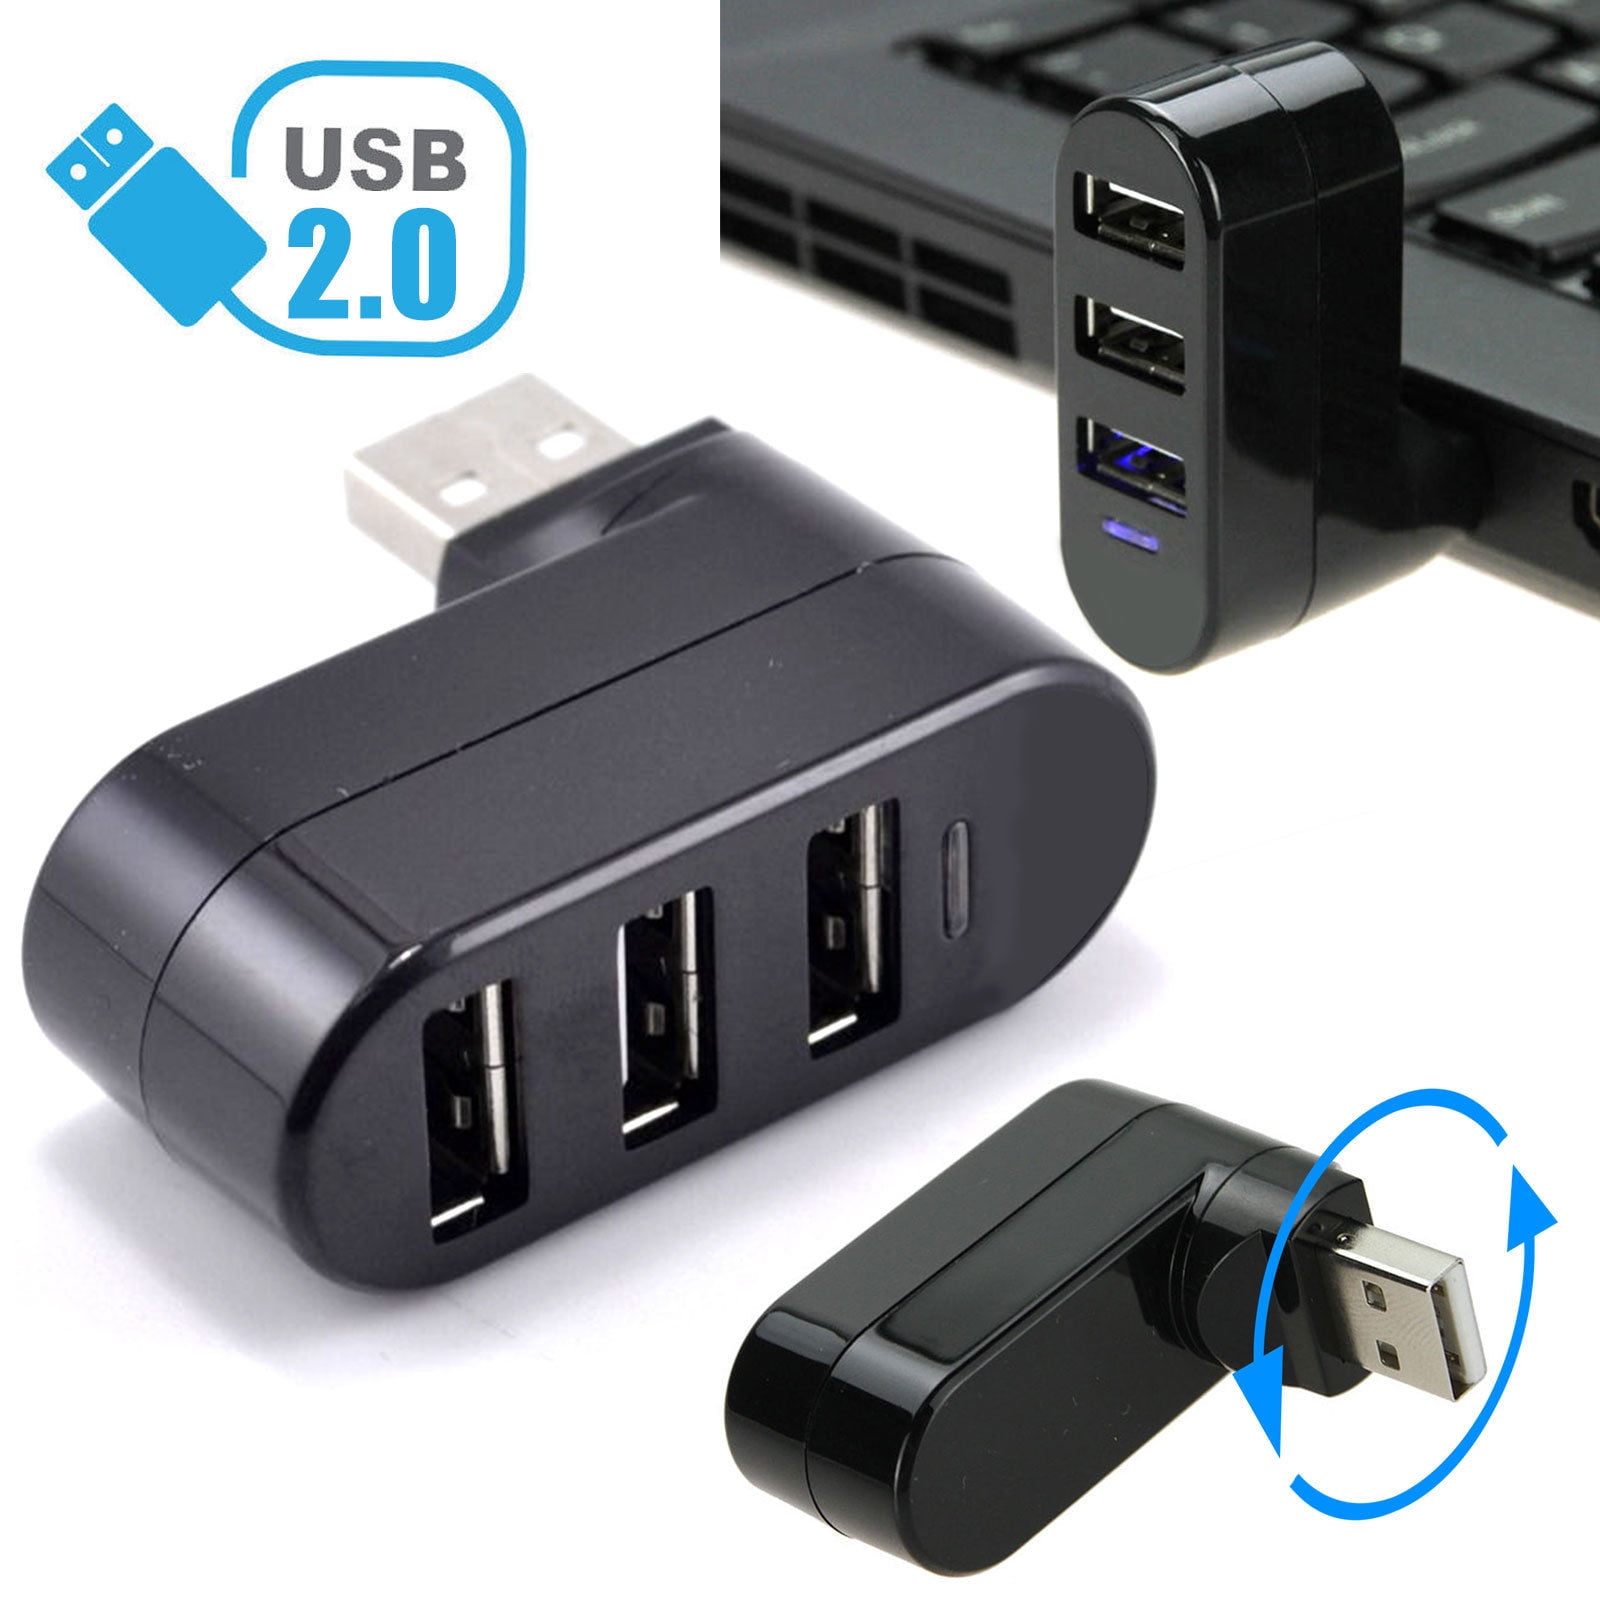 Color : Silver chensha Hub USB 3.0 Multi-Function HUB Adapter for PC Notebook，Support USB 3.0 Super Speed Transmission